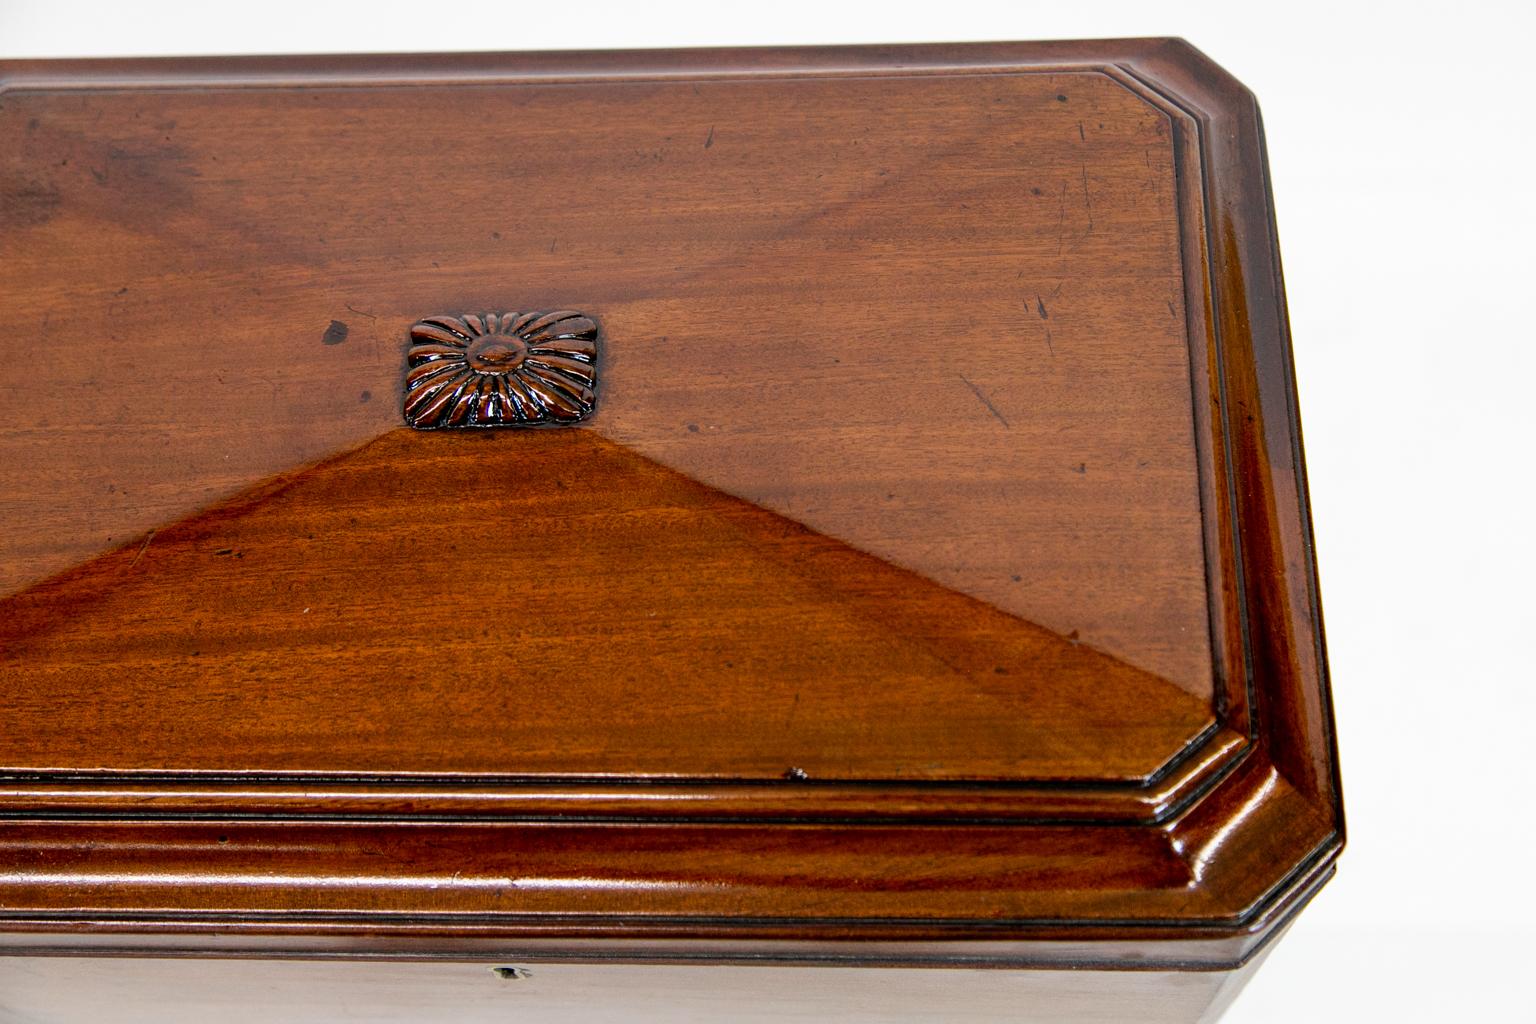 William IV mahogany tea caddy with a hand blown mixing bowl. There are two compartments with a section for serving spoons. It is trapezoid shaped on a carved stem platform base and small bun feet.